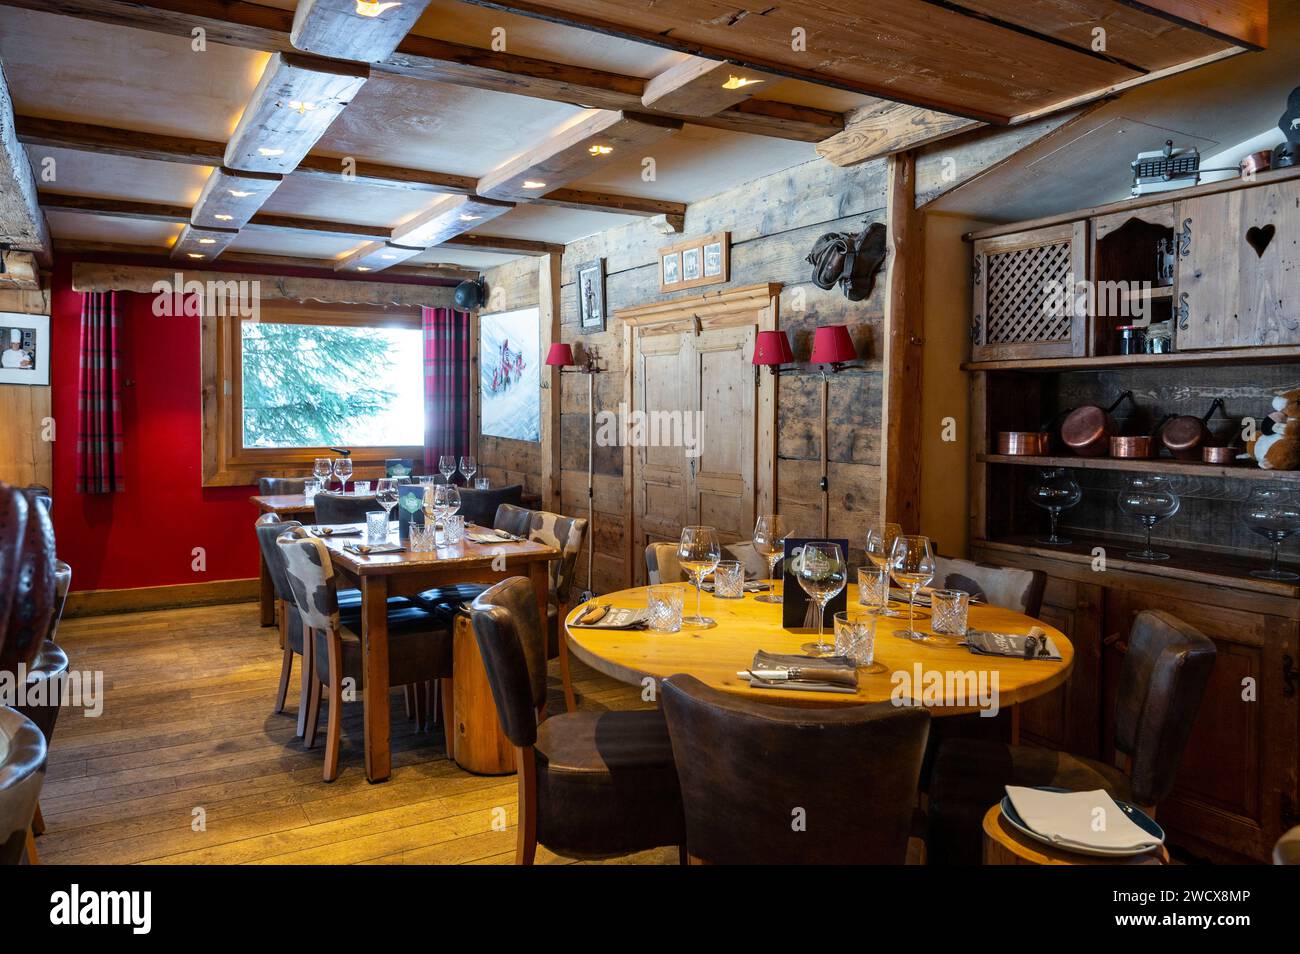 France, Haute Savoie, Megeve, restaurant Le Refuge, very cozy interior of the dining room Stock Photo